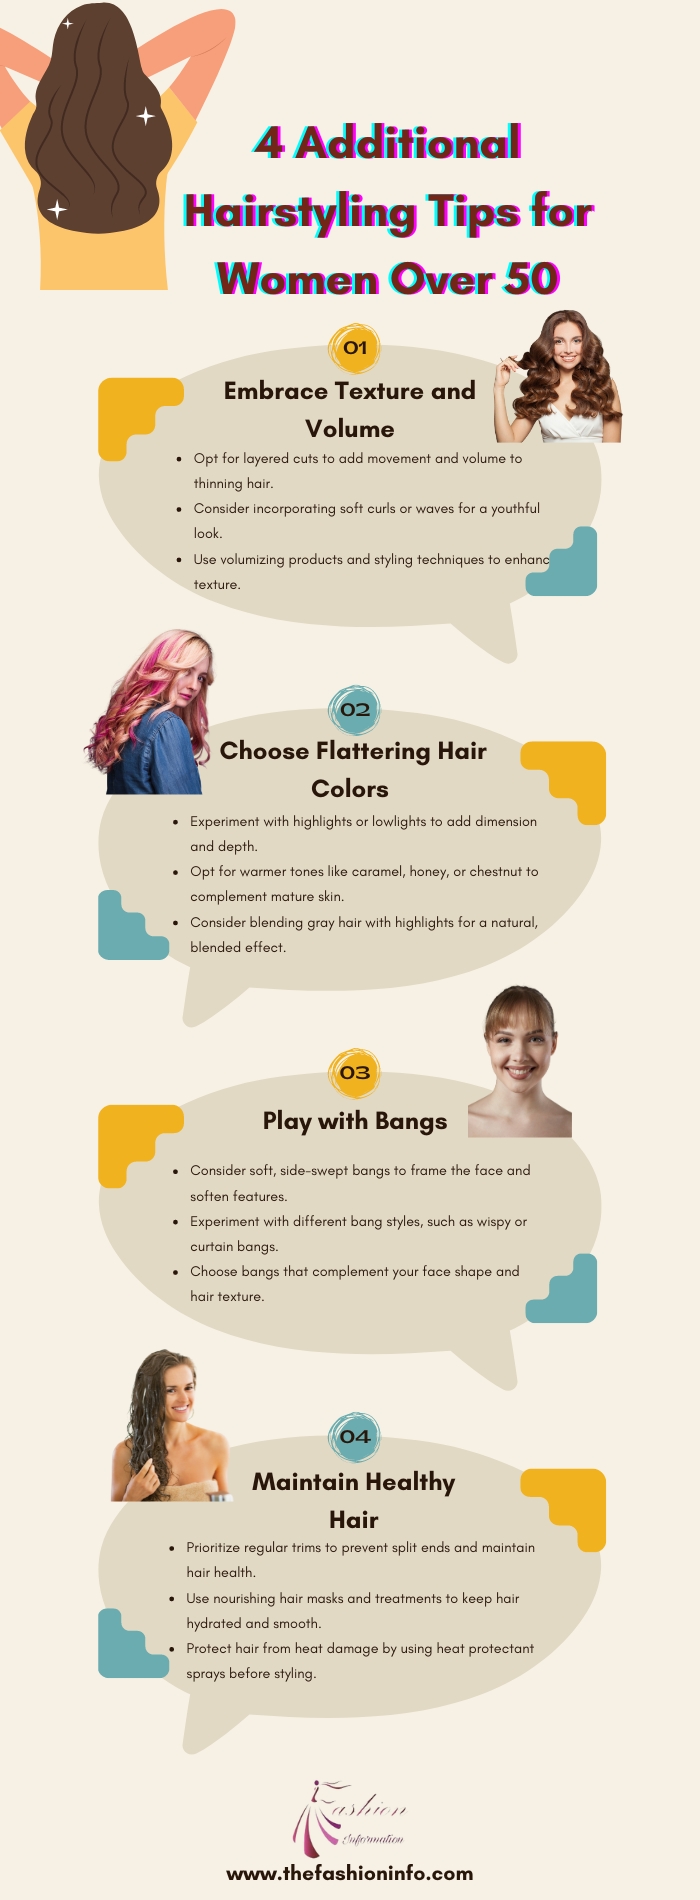 4 Additional Hairstyling Tips for Women Over 50